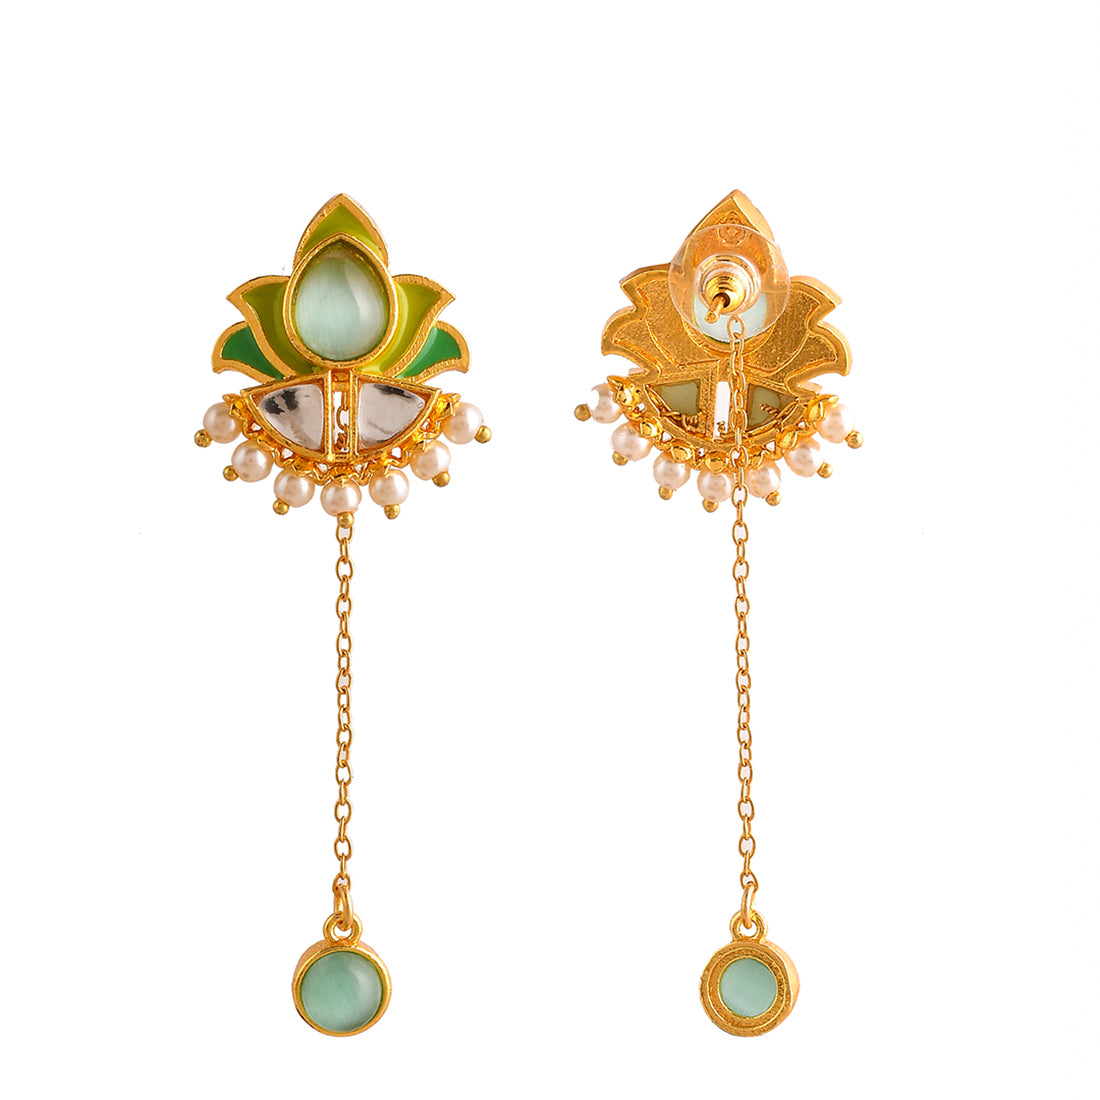 Forever More Green Stones and Pearls Enamelled Drop Earrings